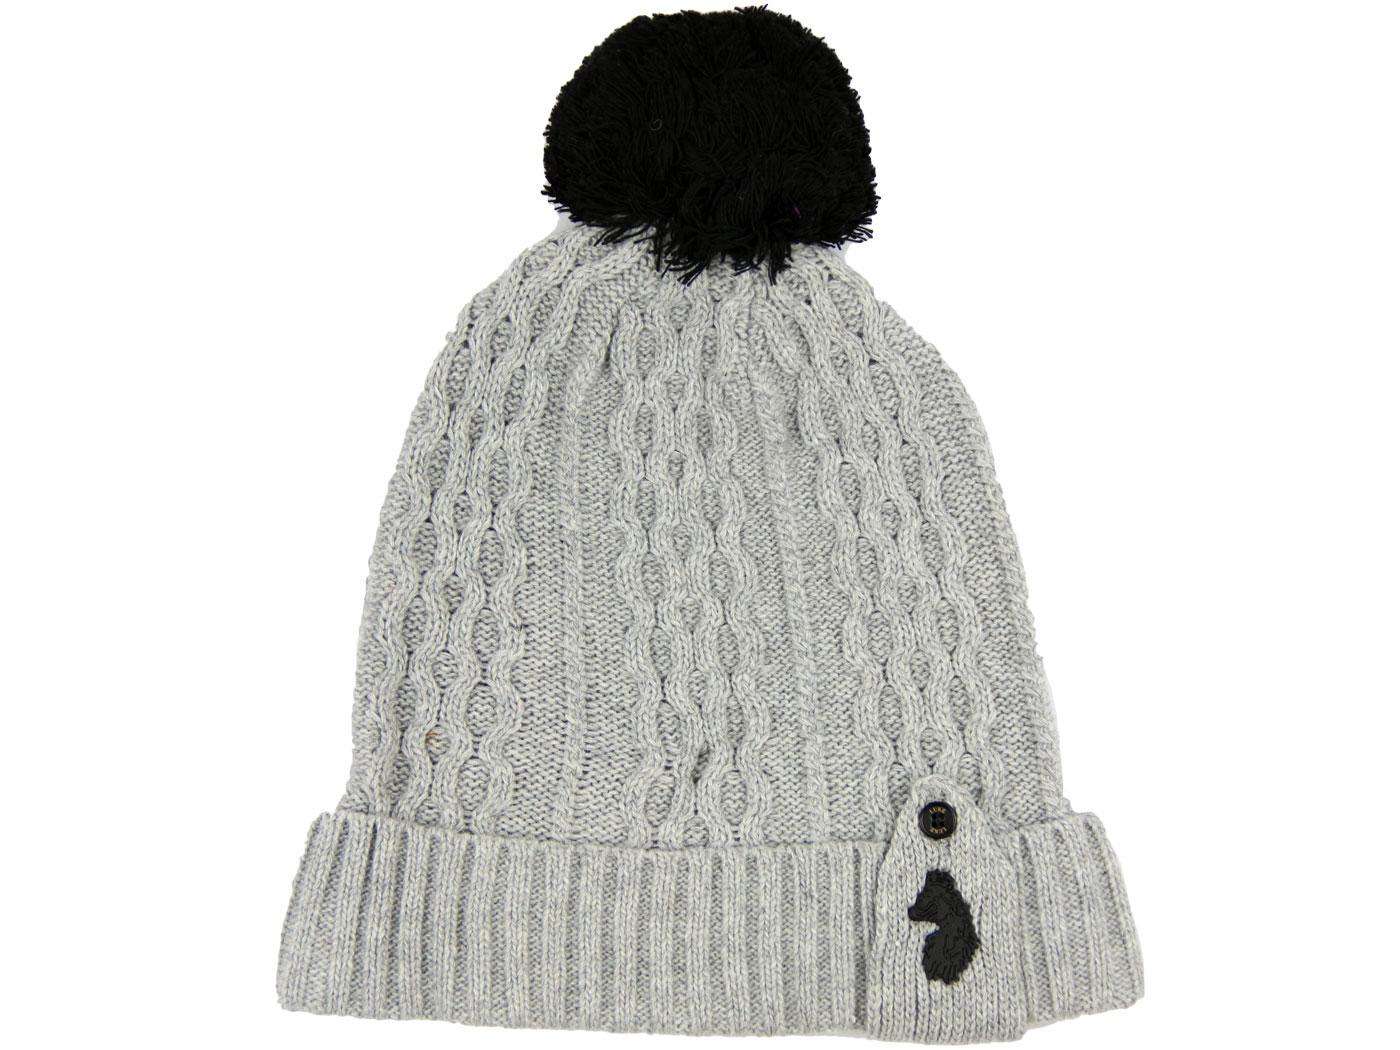 The Birdy Dance LUKE 1977 Cable Knit Bobble Hat MG